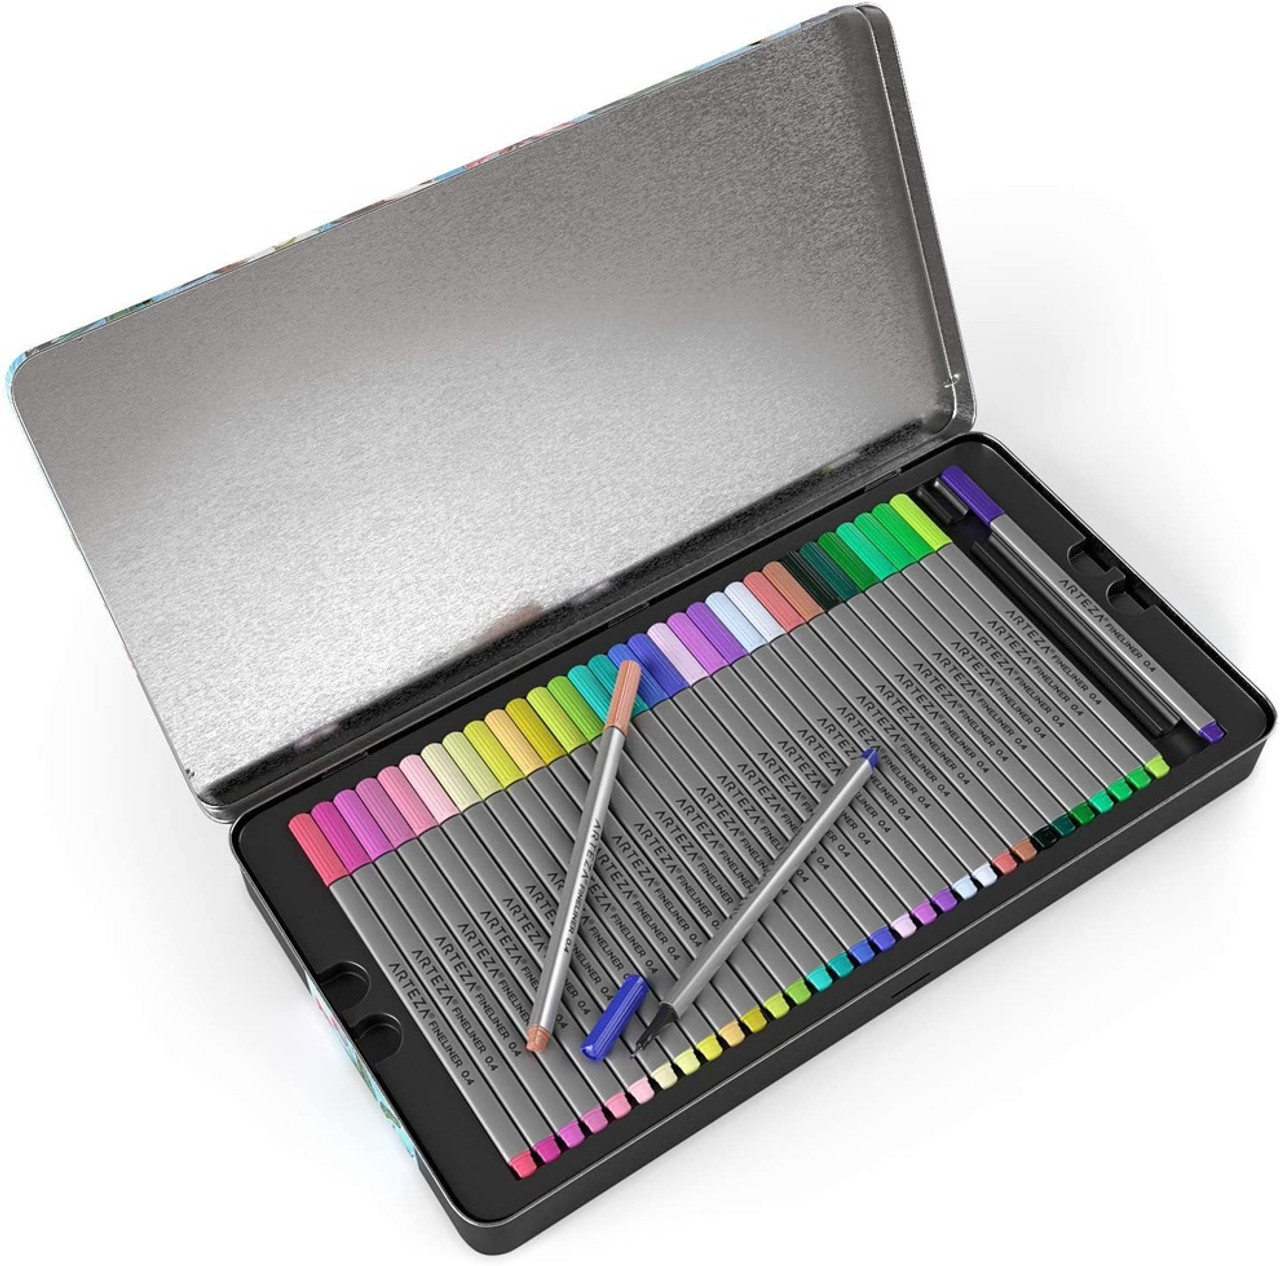 https://cdn11.bigcommerce.com/s-n7fhir4fl6/images/stencil/1280x1280/products/143/675/fineliner-pens-assorted-colors-set-of-102__EfQIpW9_990x990__19223.1596402115.jpg?c=1